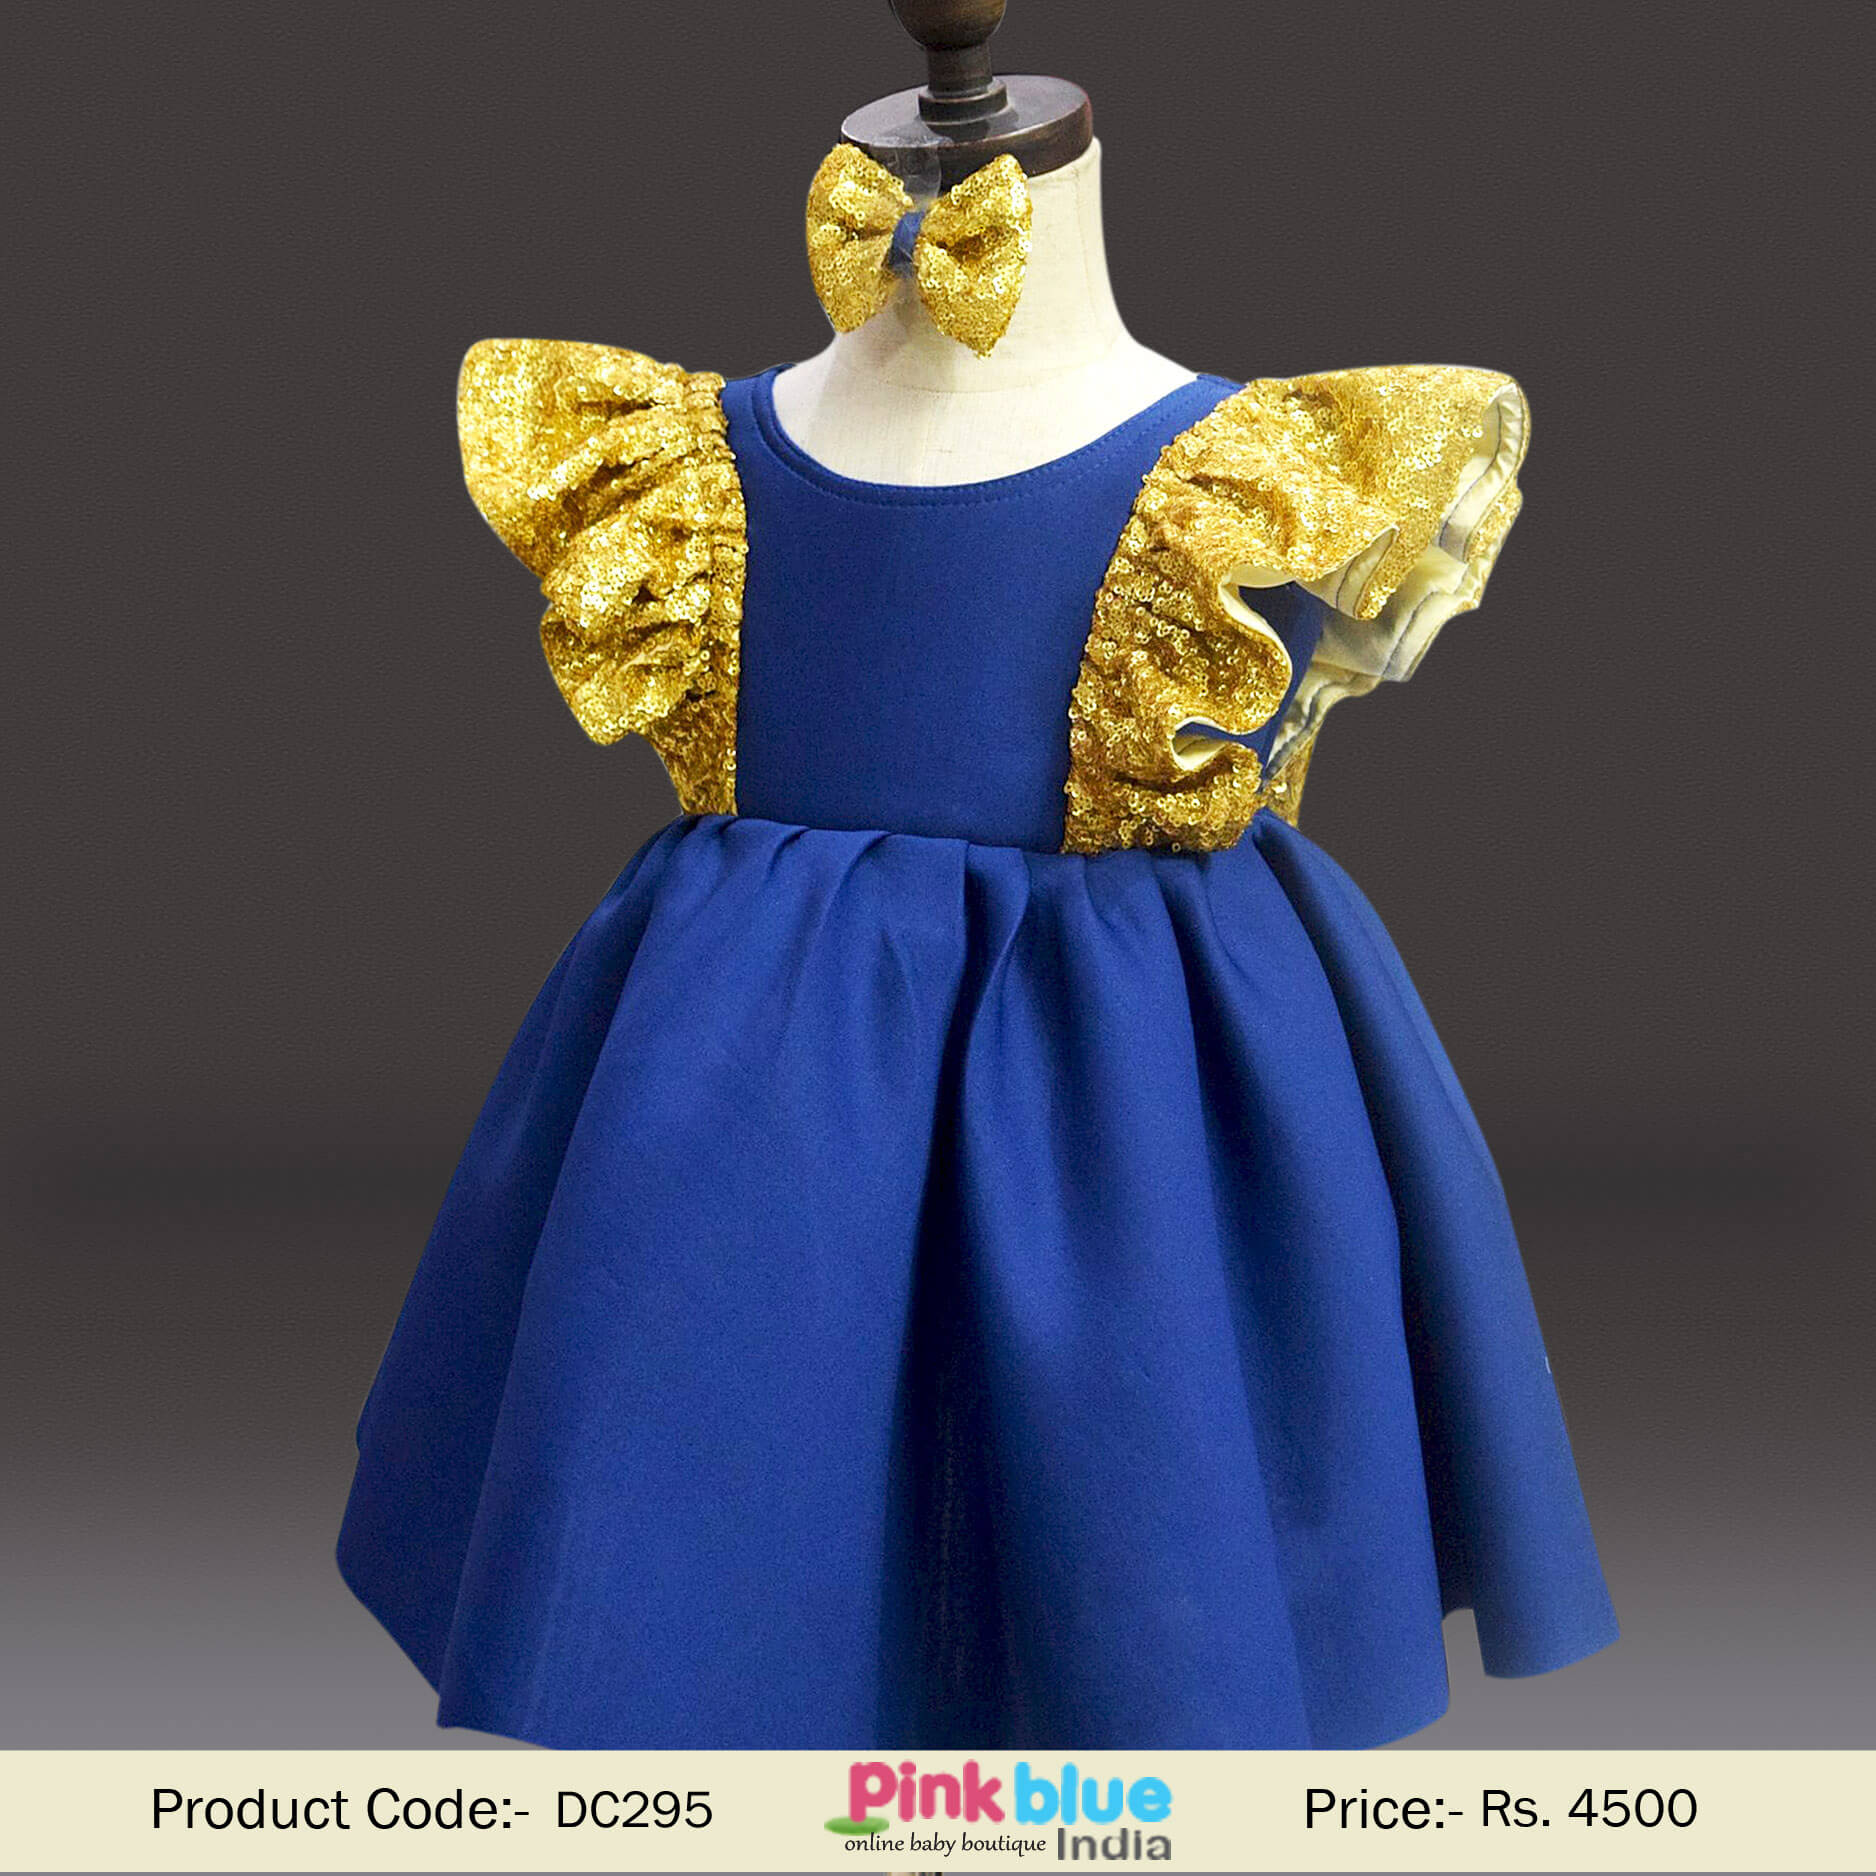 Designer Royal Blue Short Birthday Dress for Girls | Kids Indian Party Outfits